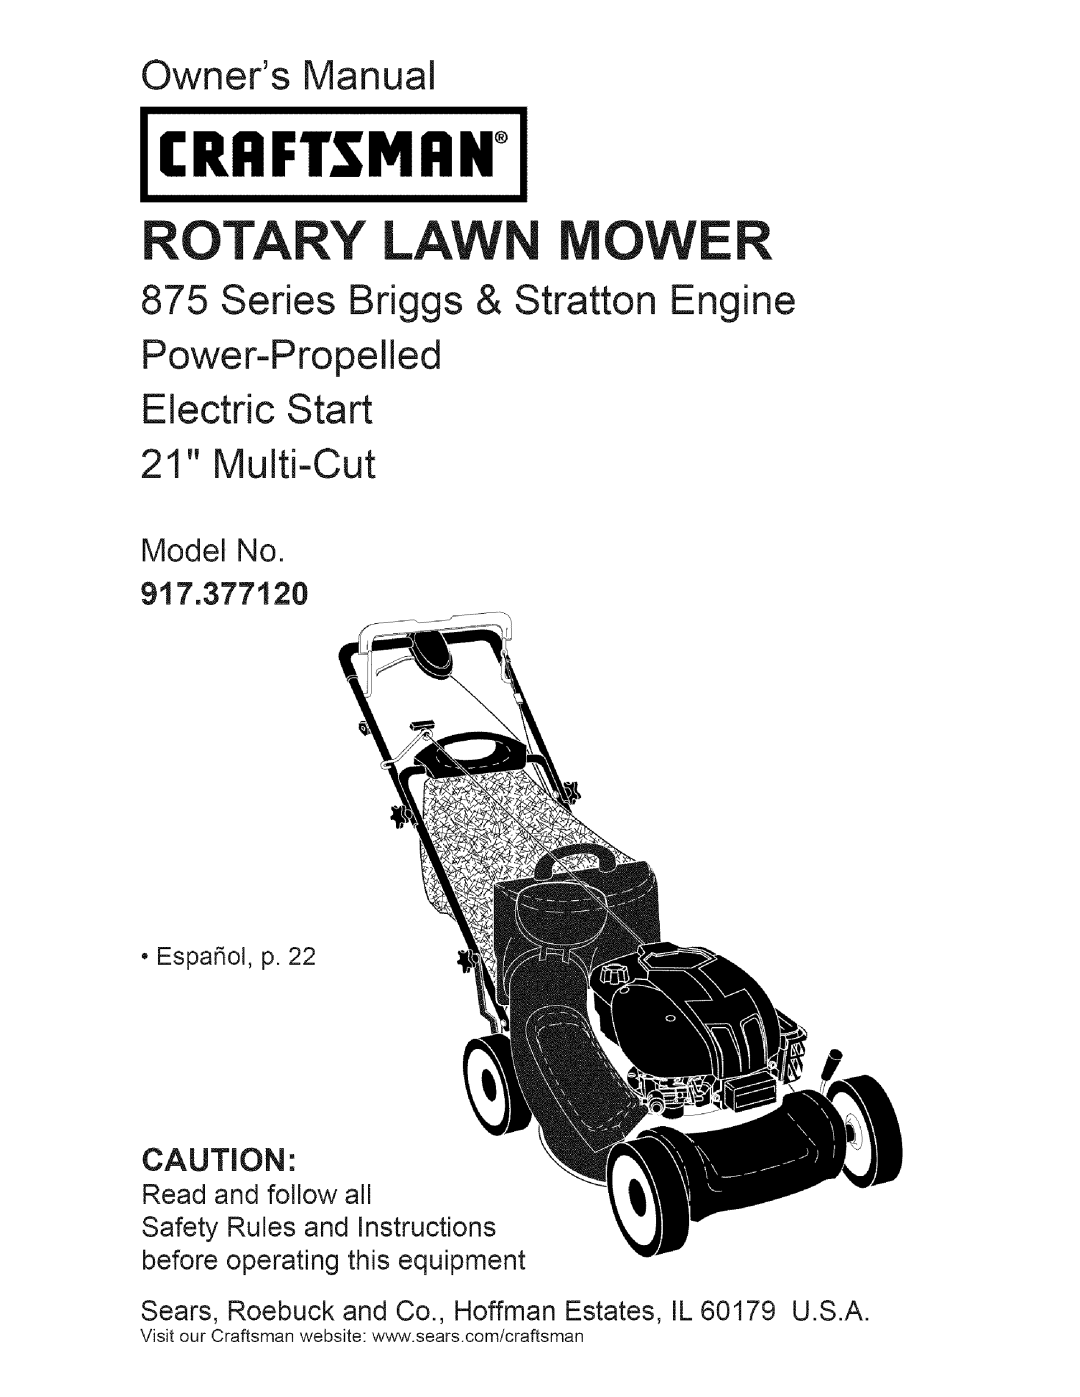 Craftsman manual Power-Propelled, Model No 917.377120, Craftsman, Rotary, Owners Manual, Electric Start 21 Multi-Cut 